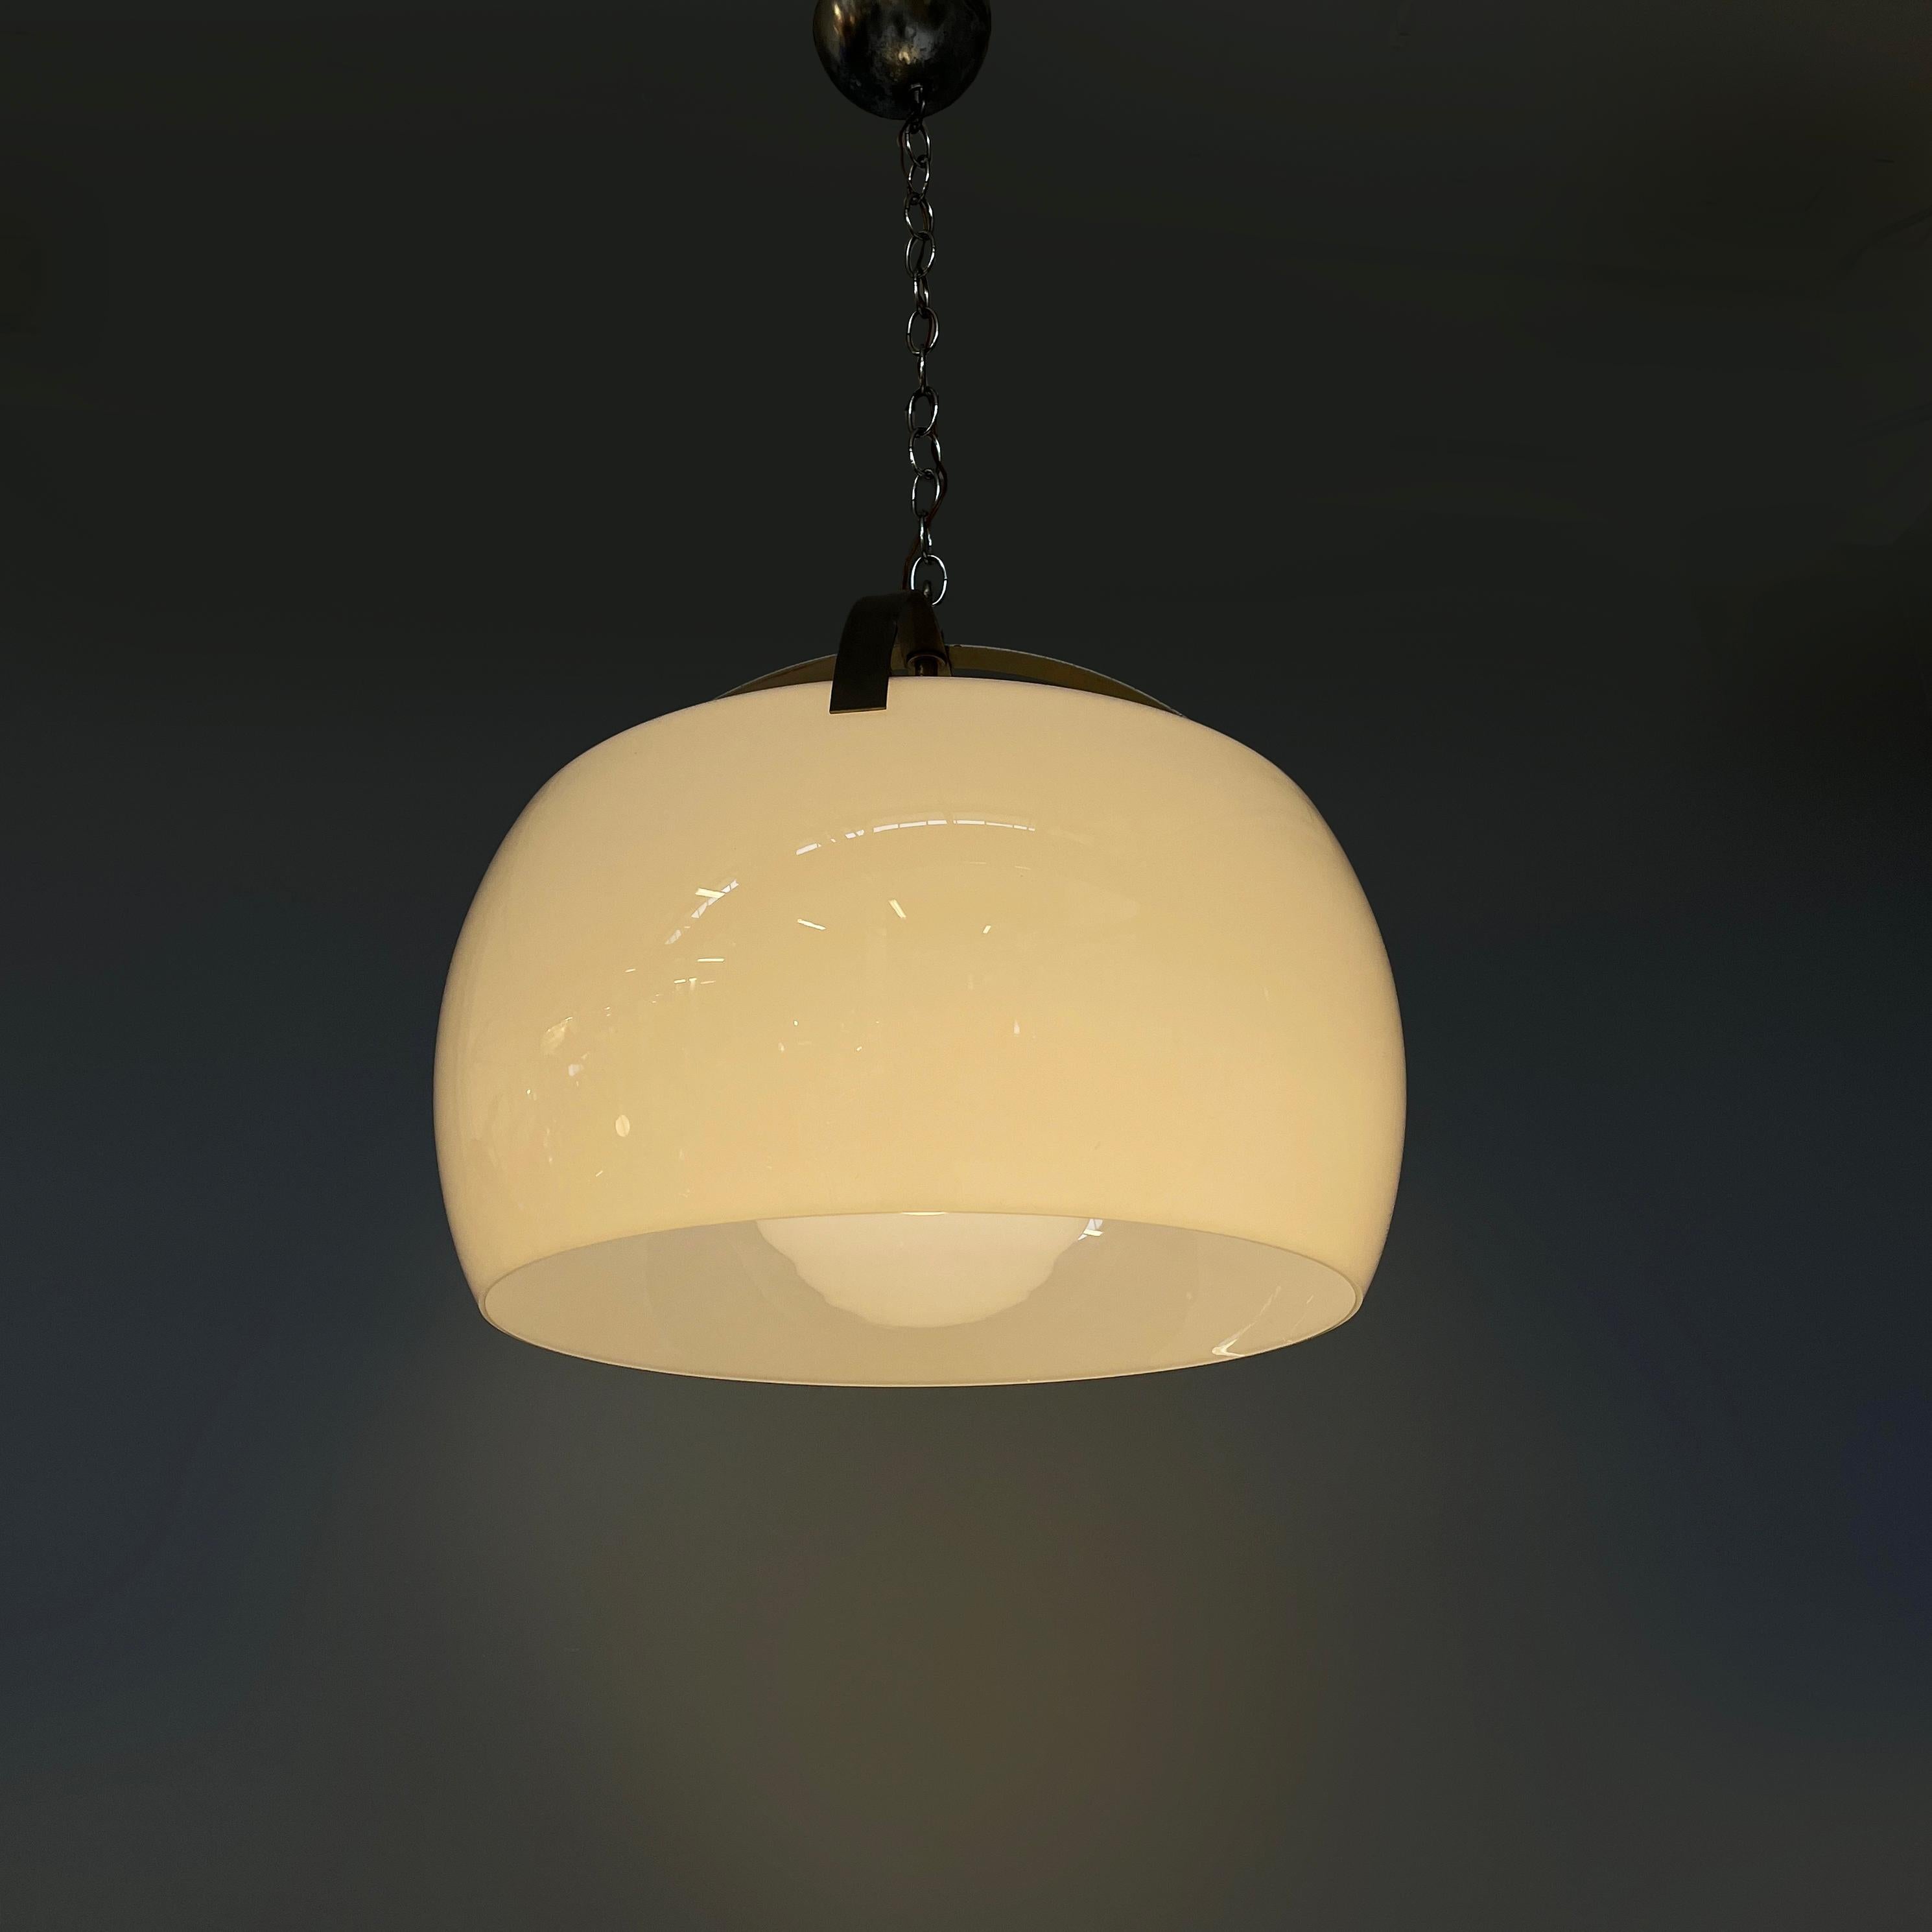 Italian mid-century modern Chandelier Omega by Vico Magistretti for Artemide, 1960s
Chandelier mod. Omega with round base lampshade and internal sphere diffuser of smaller diameter, in opal glass. The ceiling attachment is made of metal, from here